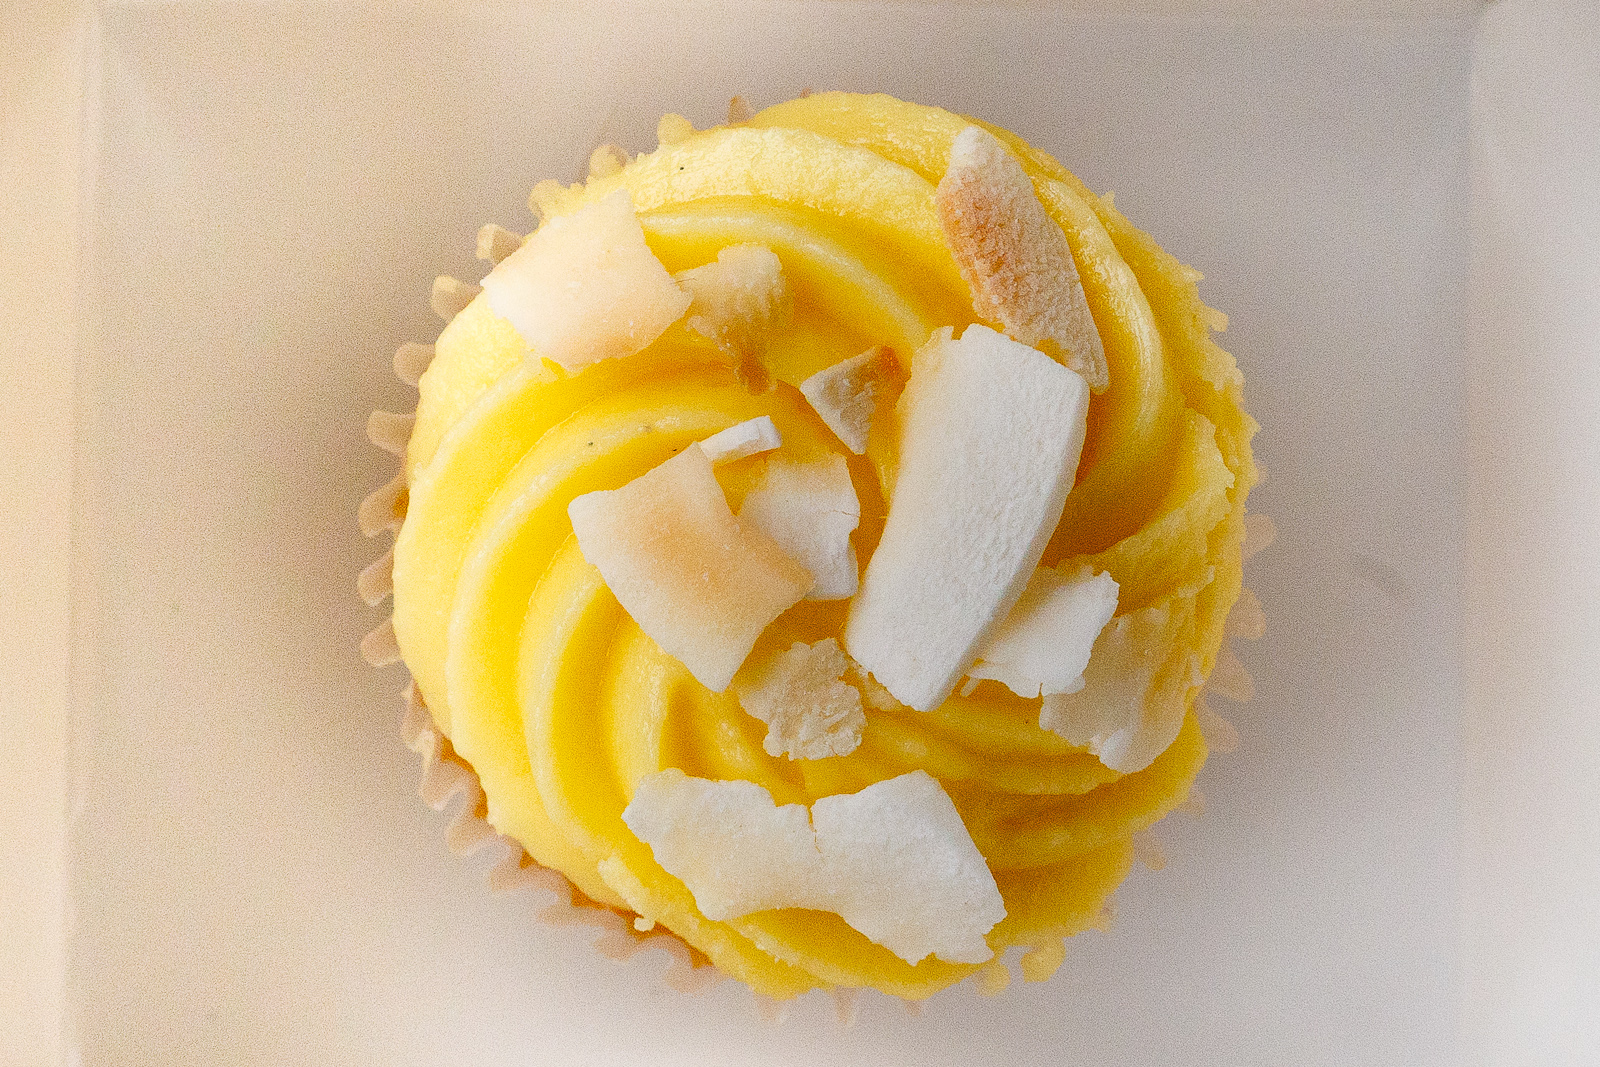 Cupcake from Robicelli's, Coconut Custard ($3.50)